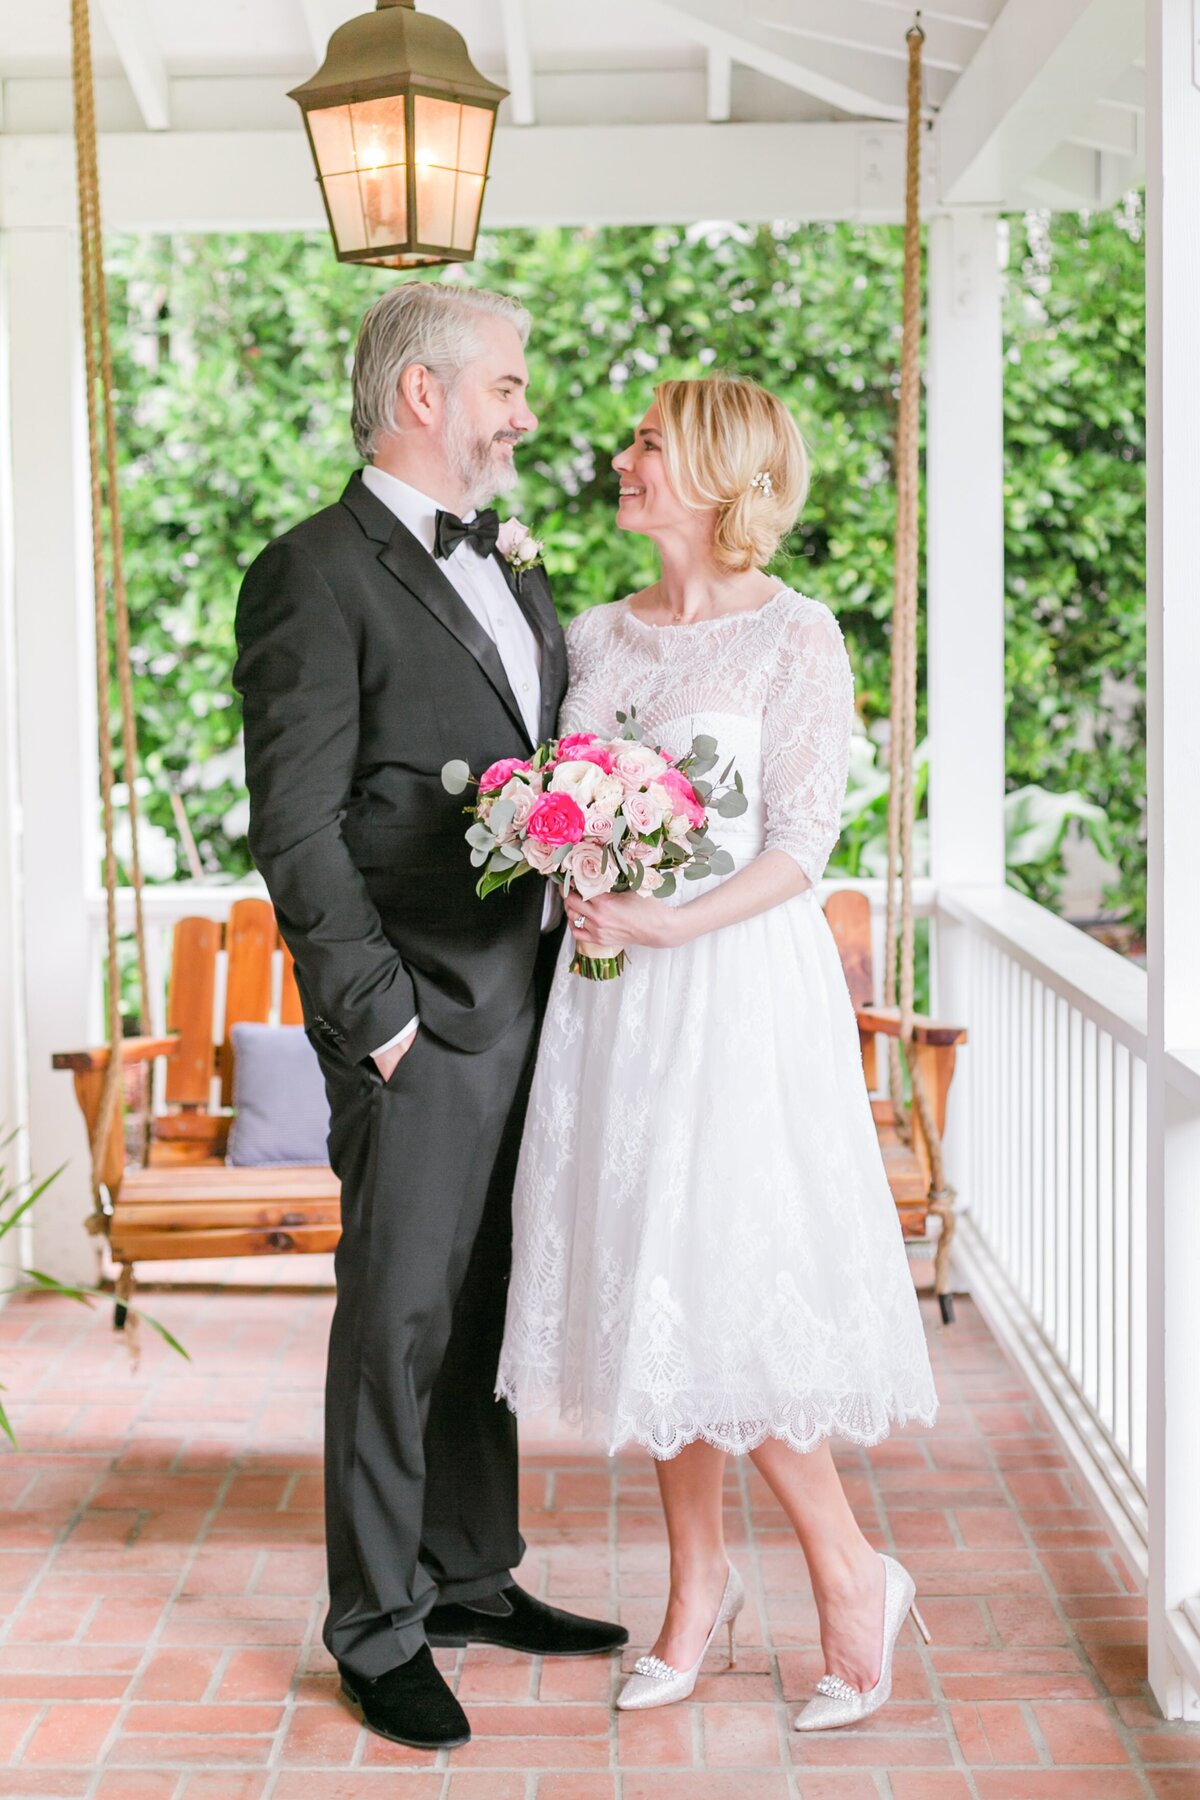 KelliBeePhotography_Vow-Renewal-Hollywood-Hills-Los-Angeles-Bluebell-events-0029